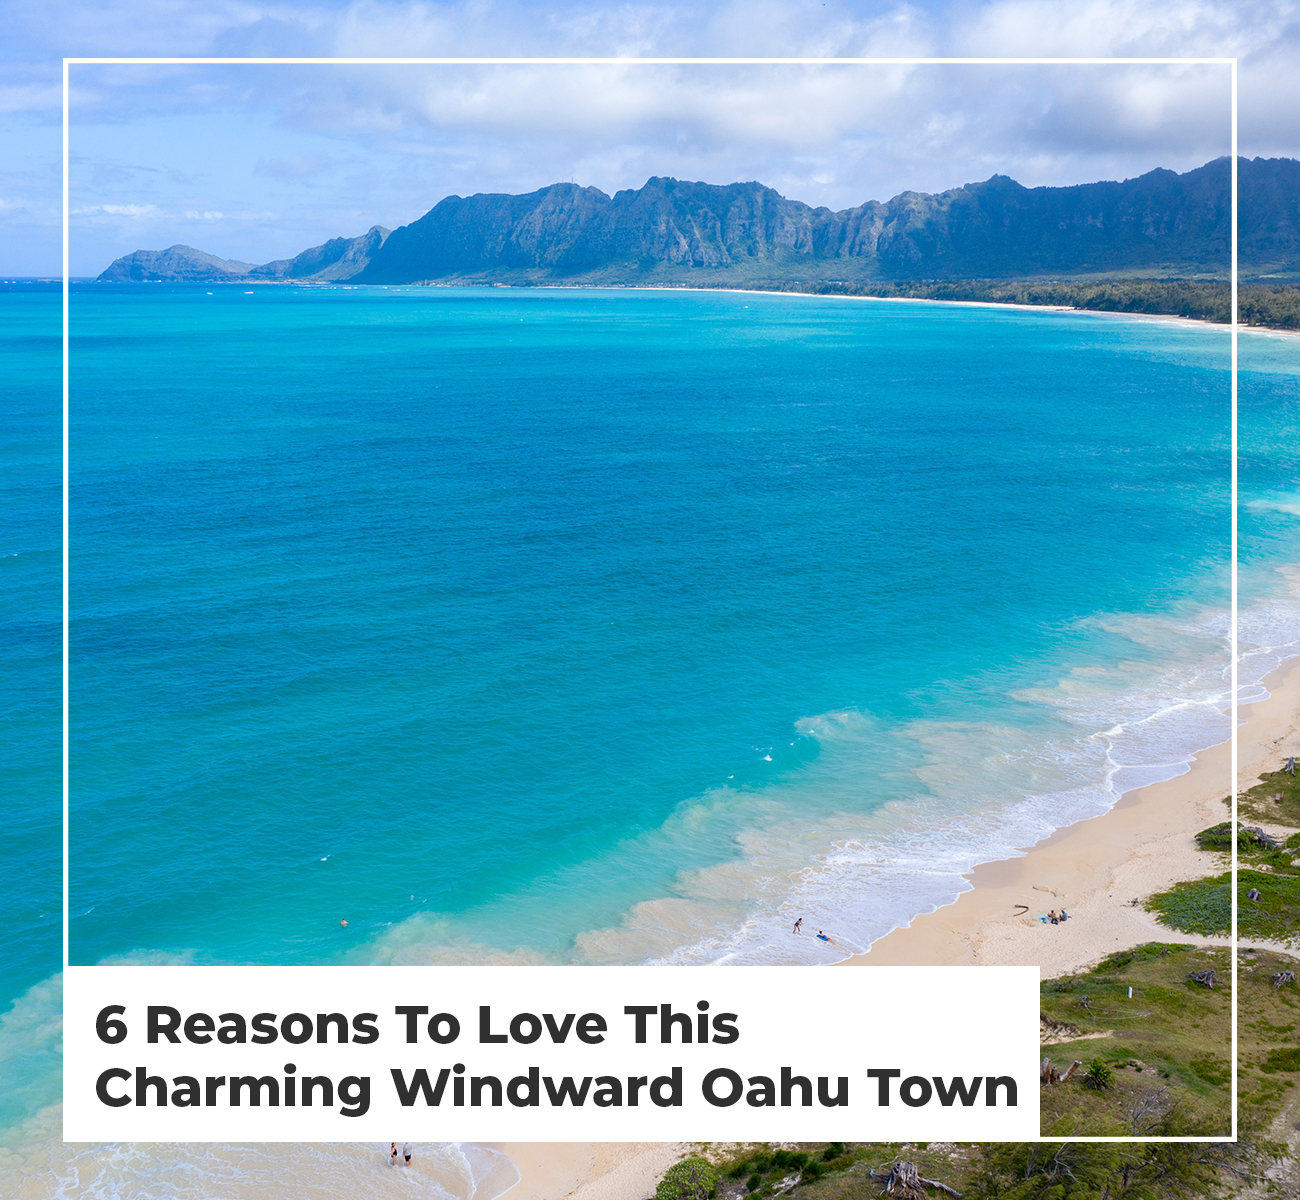 6 Reasons To Love This Charming Windward Oahu Town - Main Image